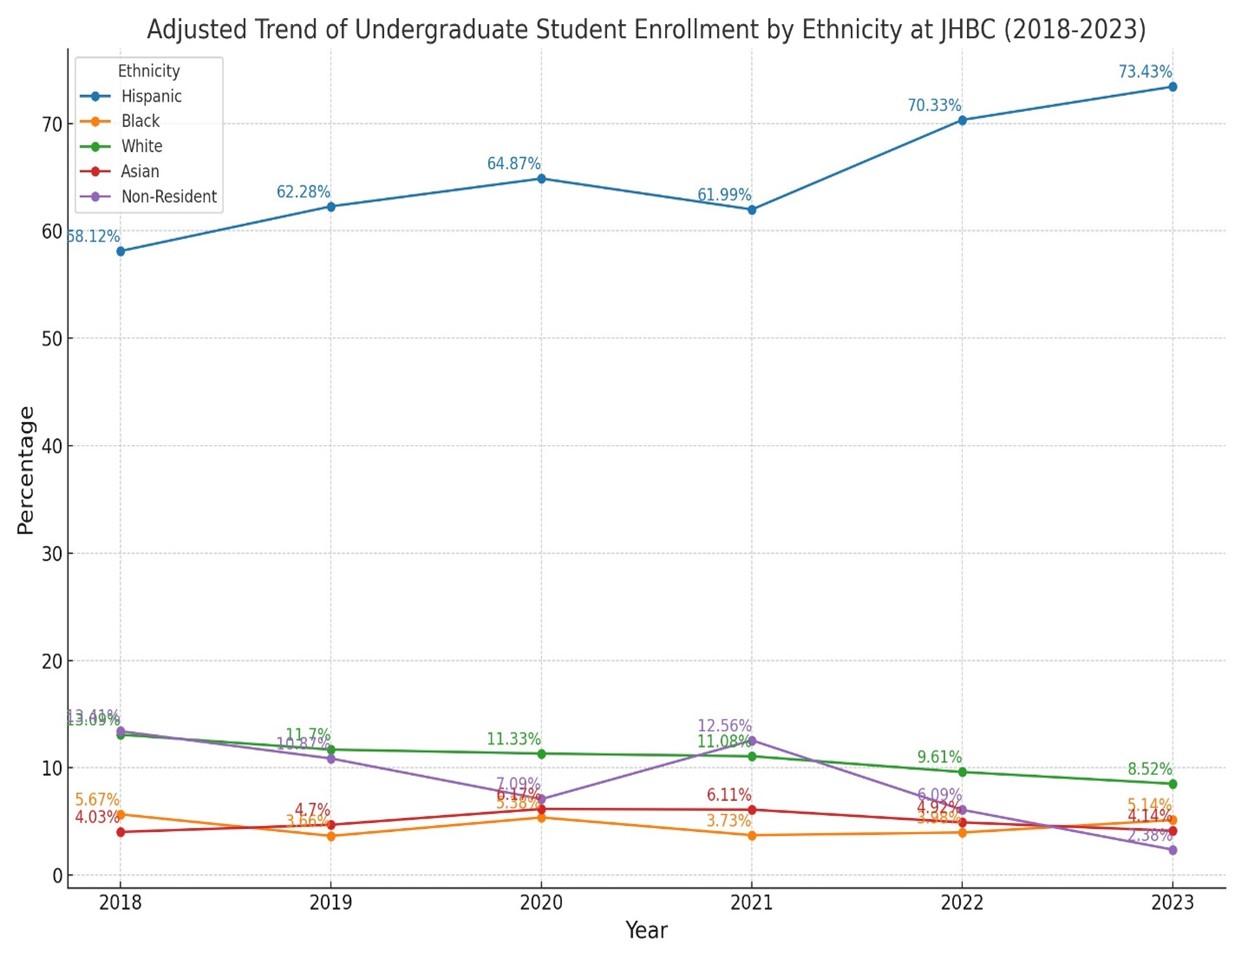 Adjusted trend of undergraduate student enrollment by ethnicity at JHBC (2018 - 2023)